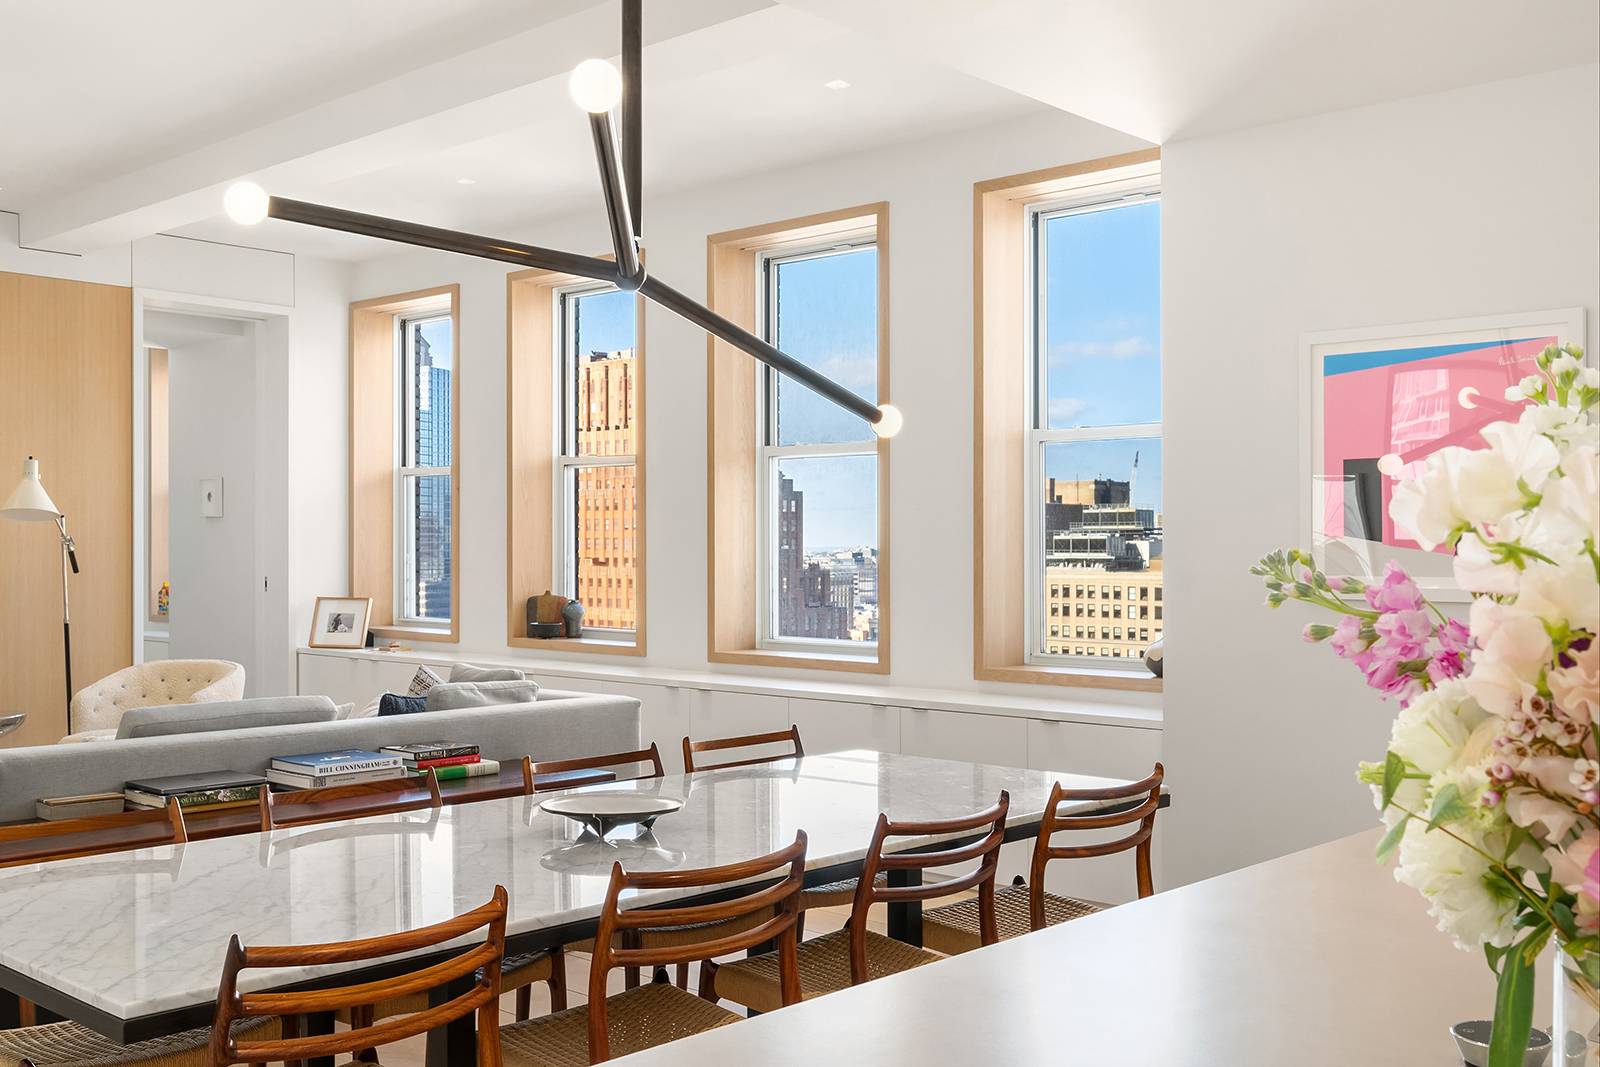 Recently Renovated, Barely Lived In and Move in Ready Loft With finishes and interiors straight from the pages of Architectural Digest, open city views, amazing light and the latest in ...